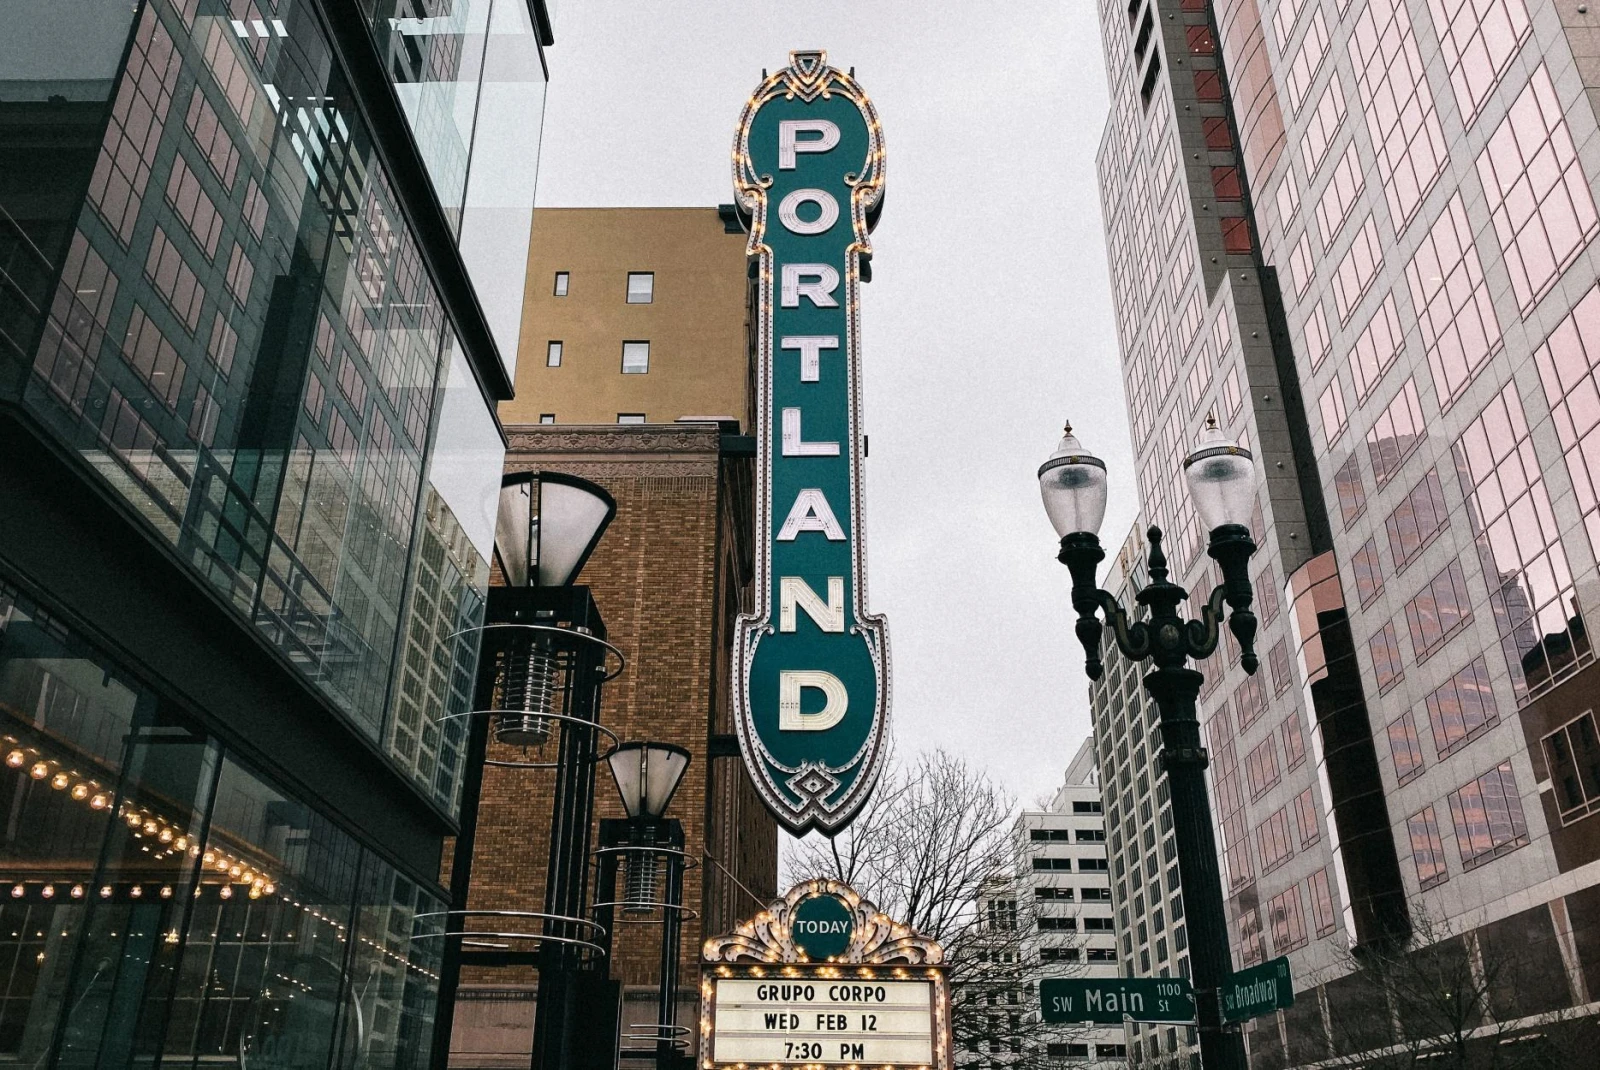 long old school vertical sign over a theater reads, "portland" in white letters, surrounded by large glass high rise buildings 